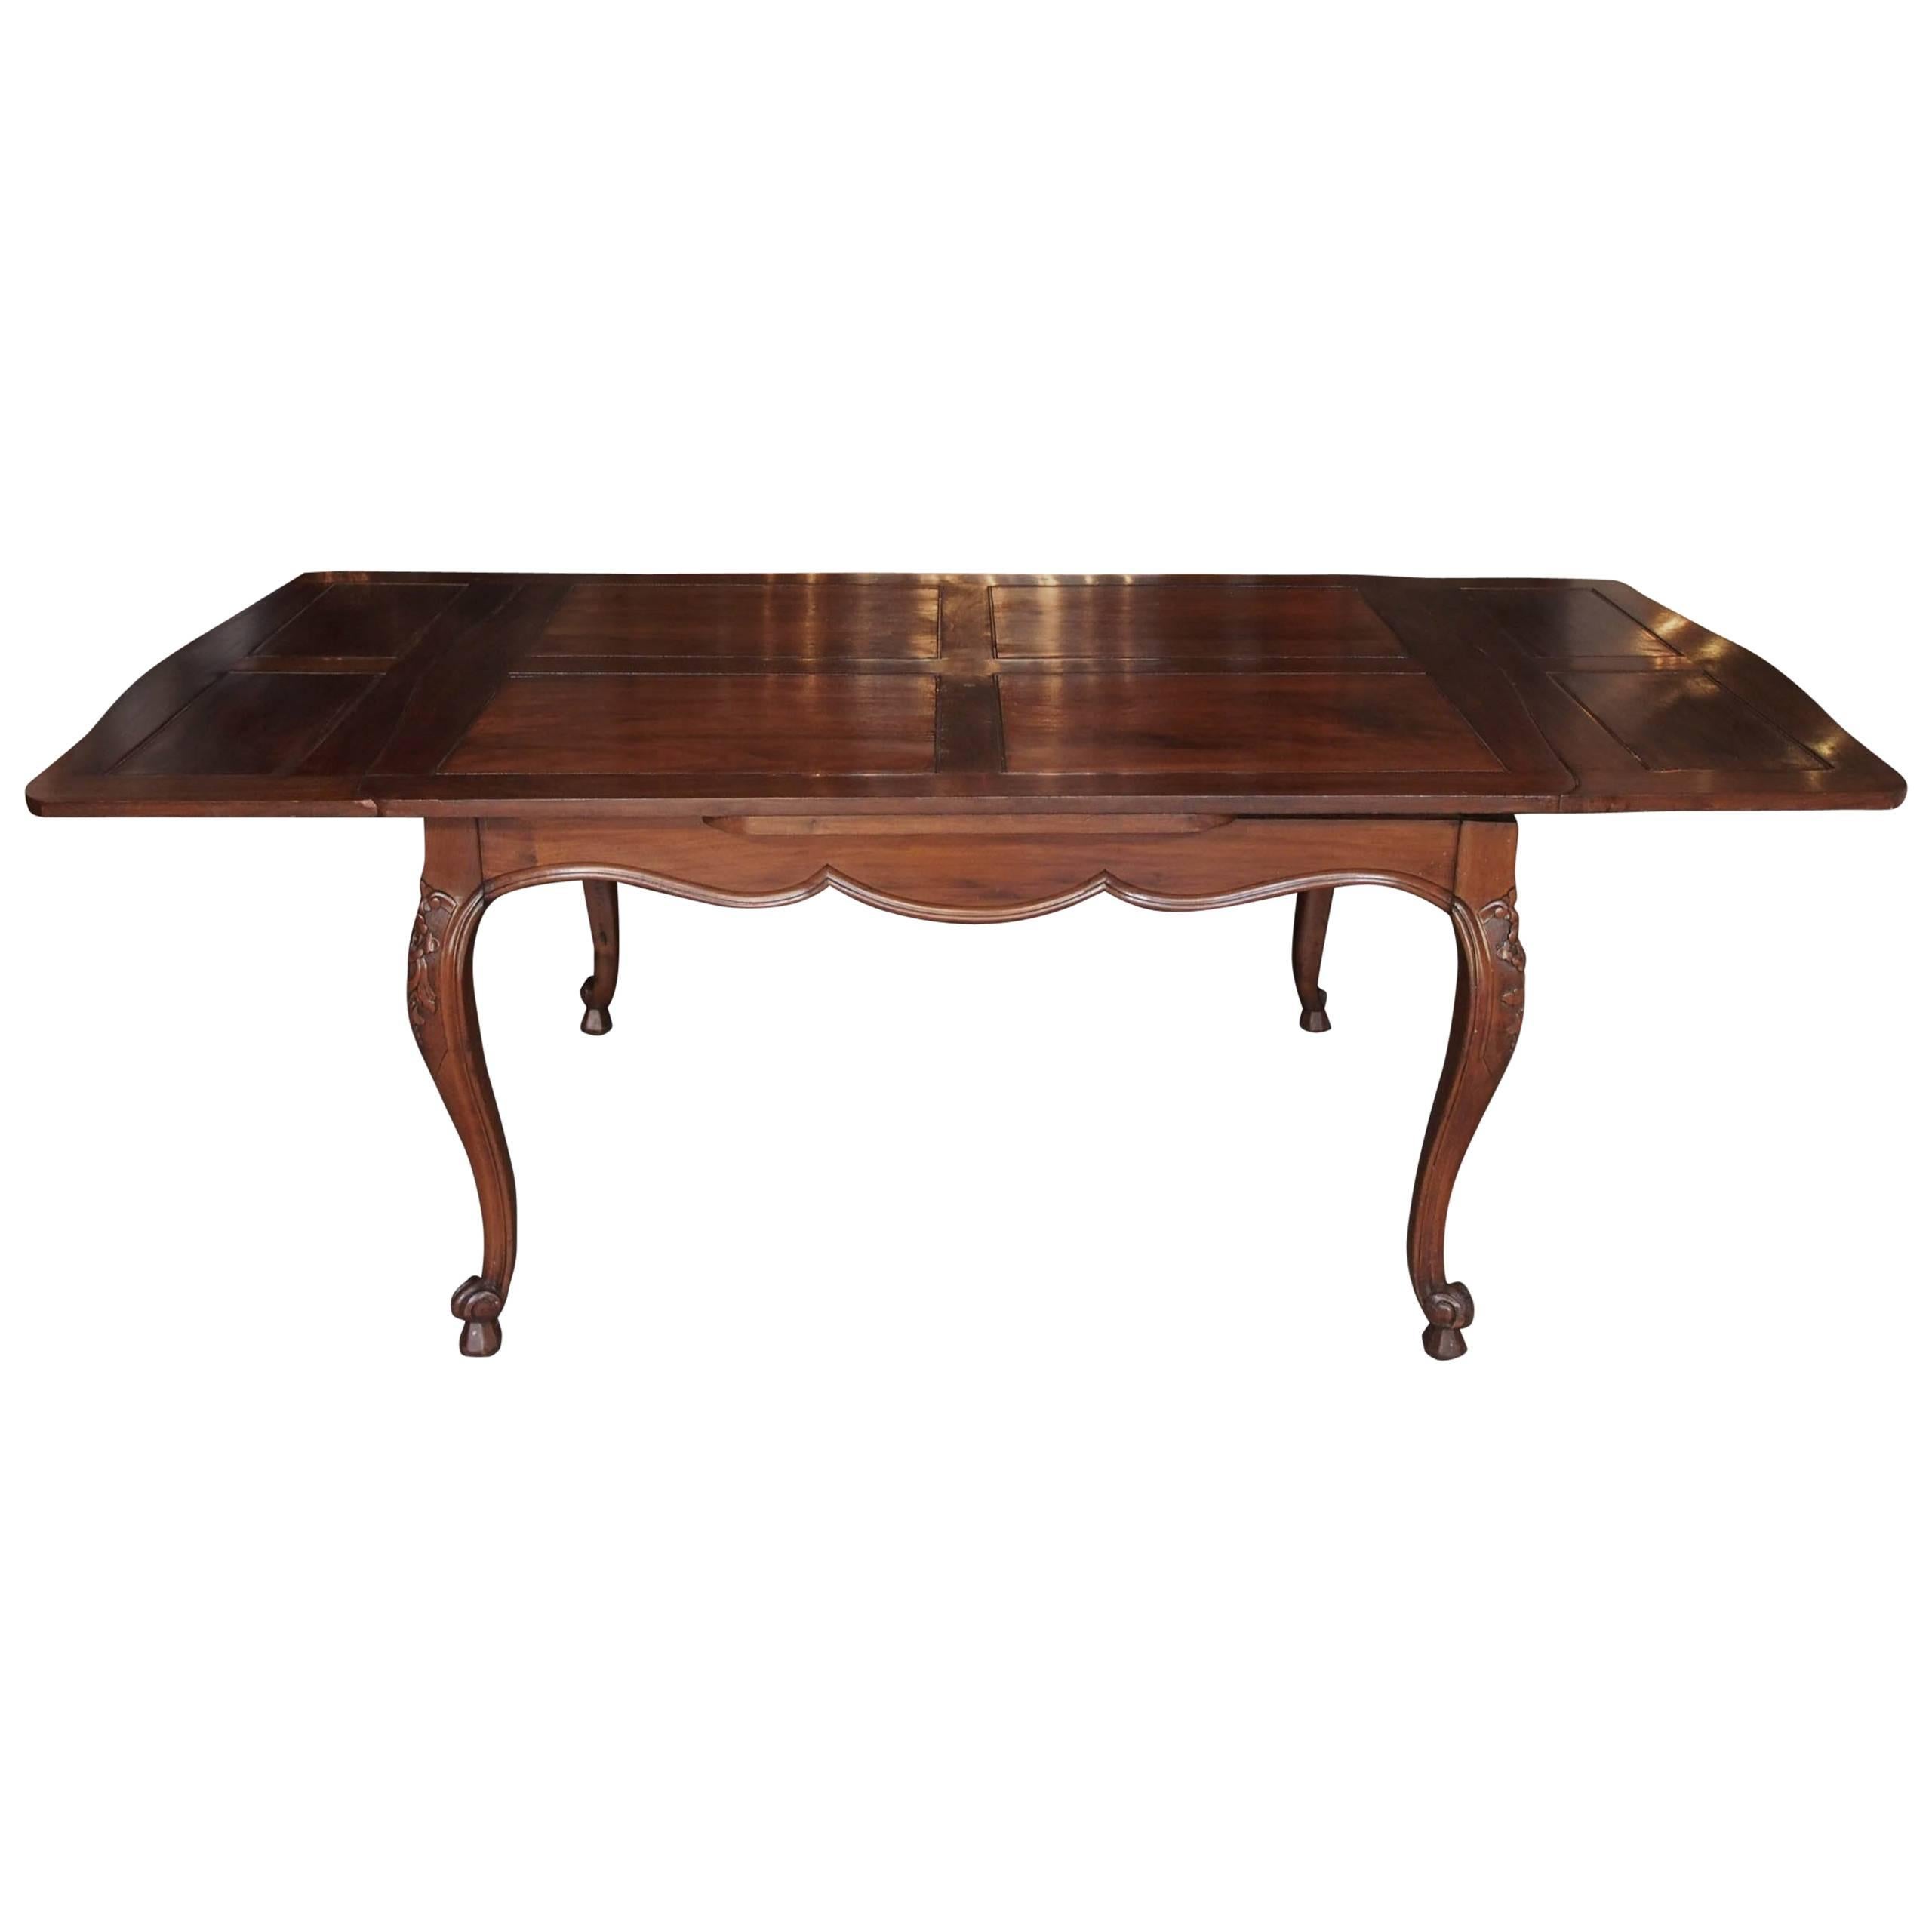 Antique French Country Draw-Leaf Table Fruitwood and Mahogany